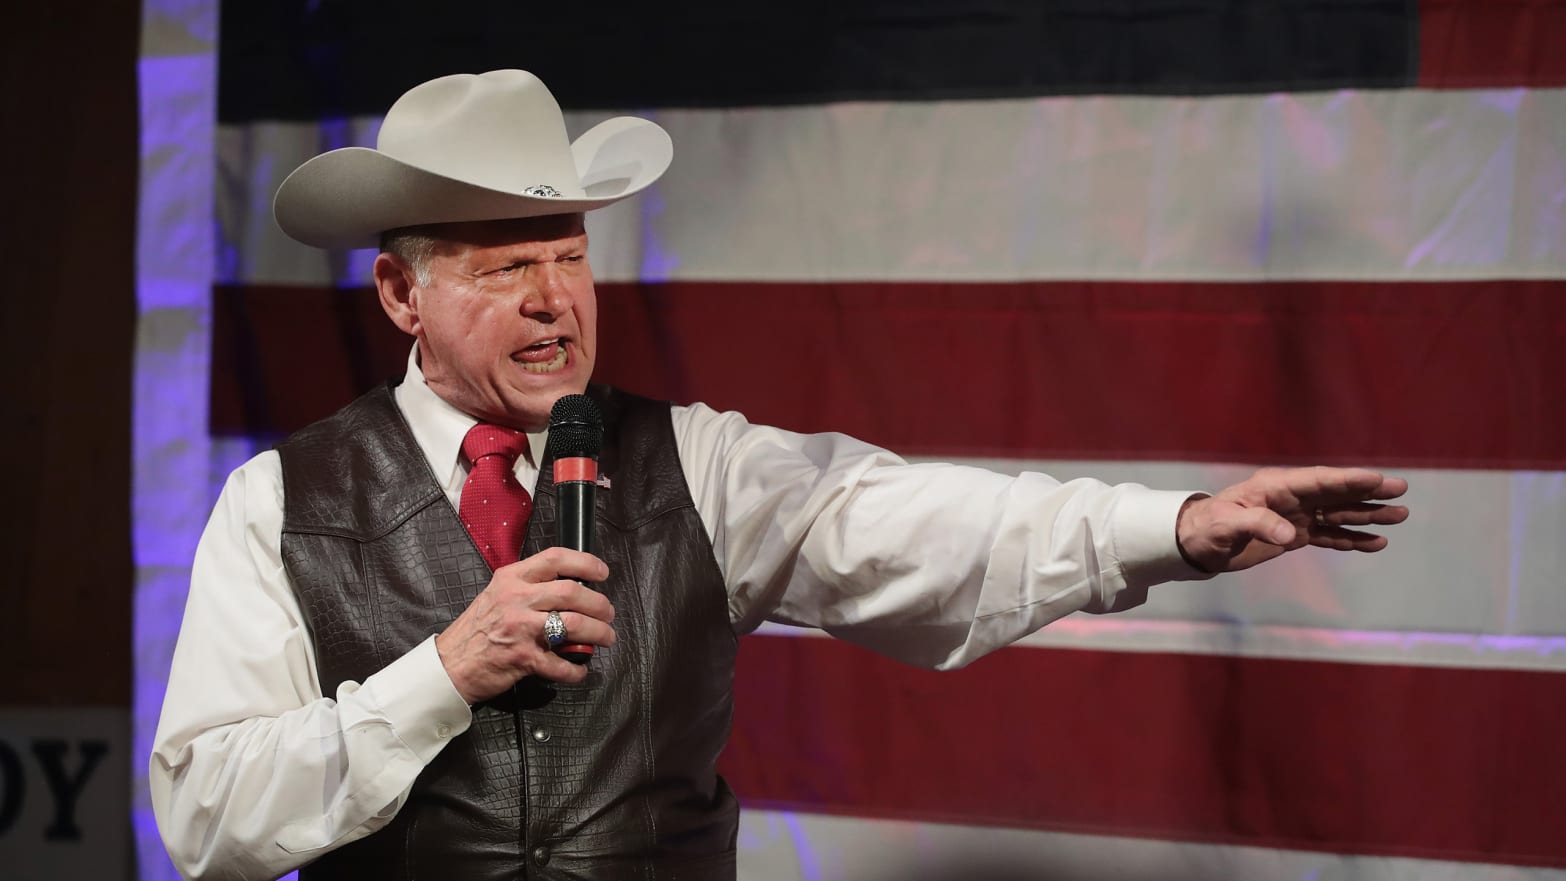 Republican candidate for the U.S. Senate in Alabama, Roy Moore, speaks at a campaign rally on September 25, 2017 in Fairhope, Alabama.